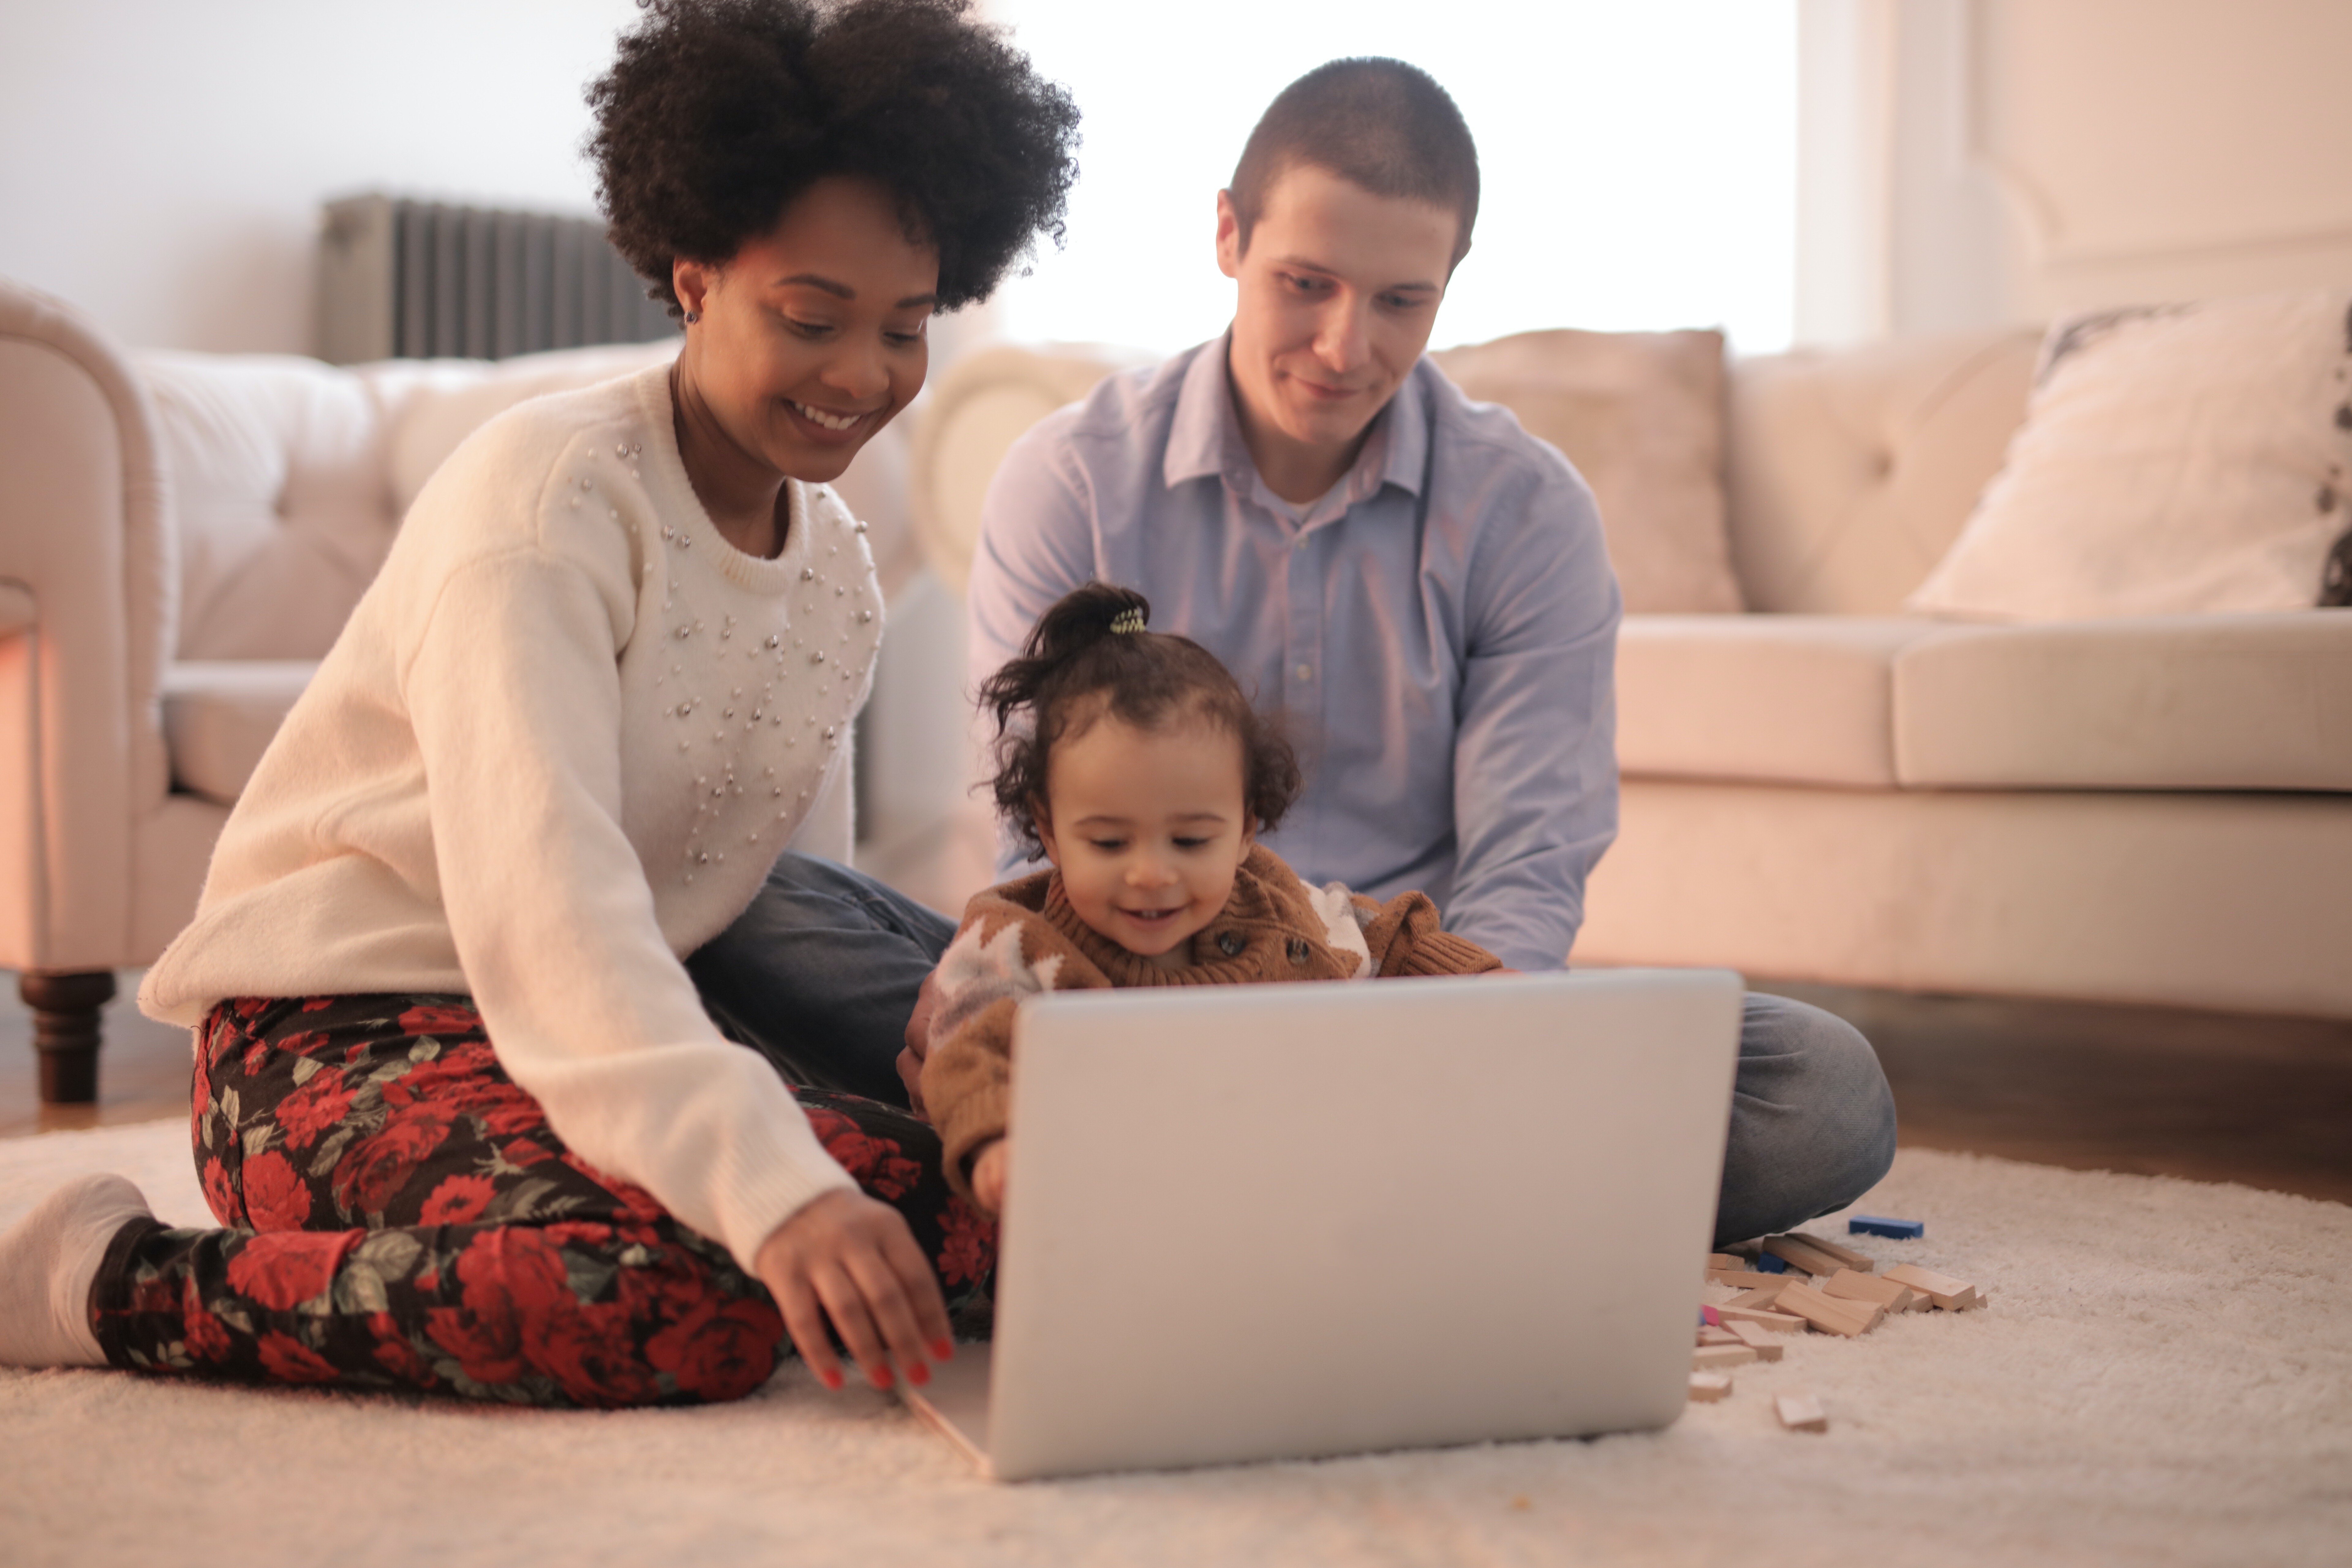 Mother and father sit on the floor with their child who is on a laptop.